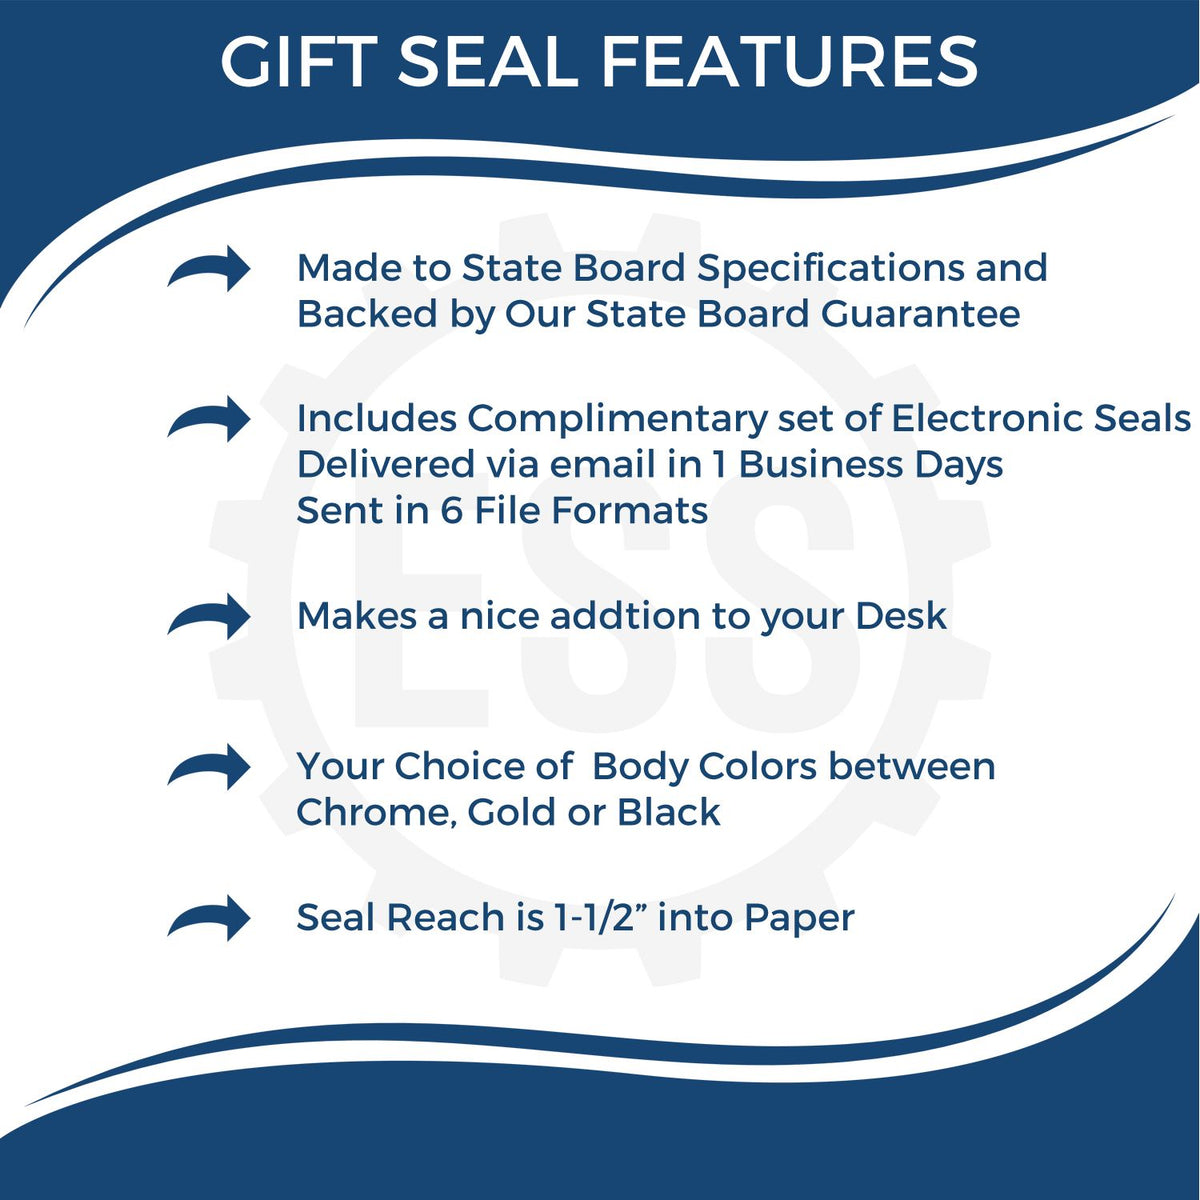 A picture of an infographic highlighting the selling points for the Gift New Hampshire Geologist Seal